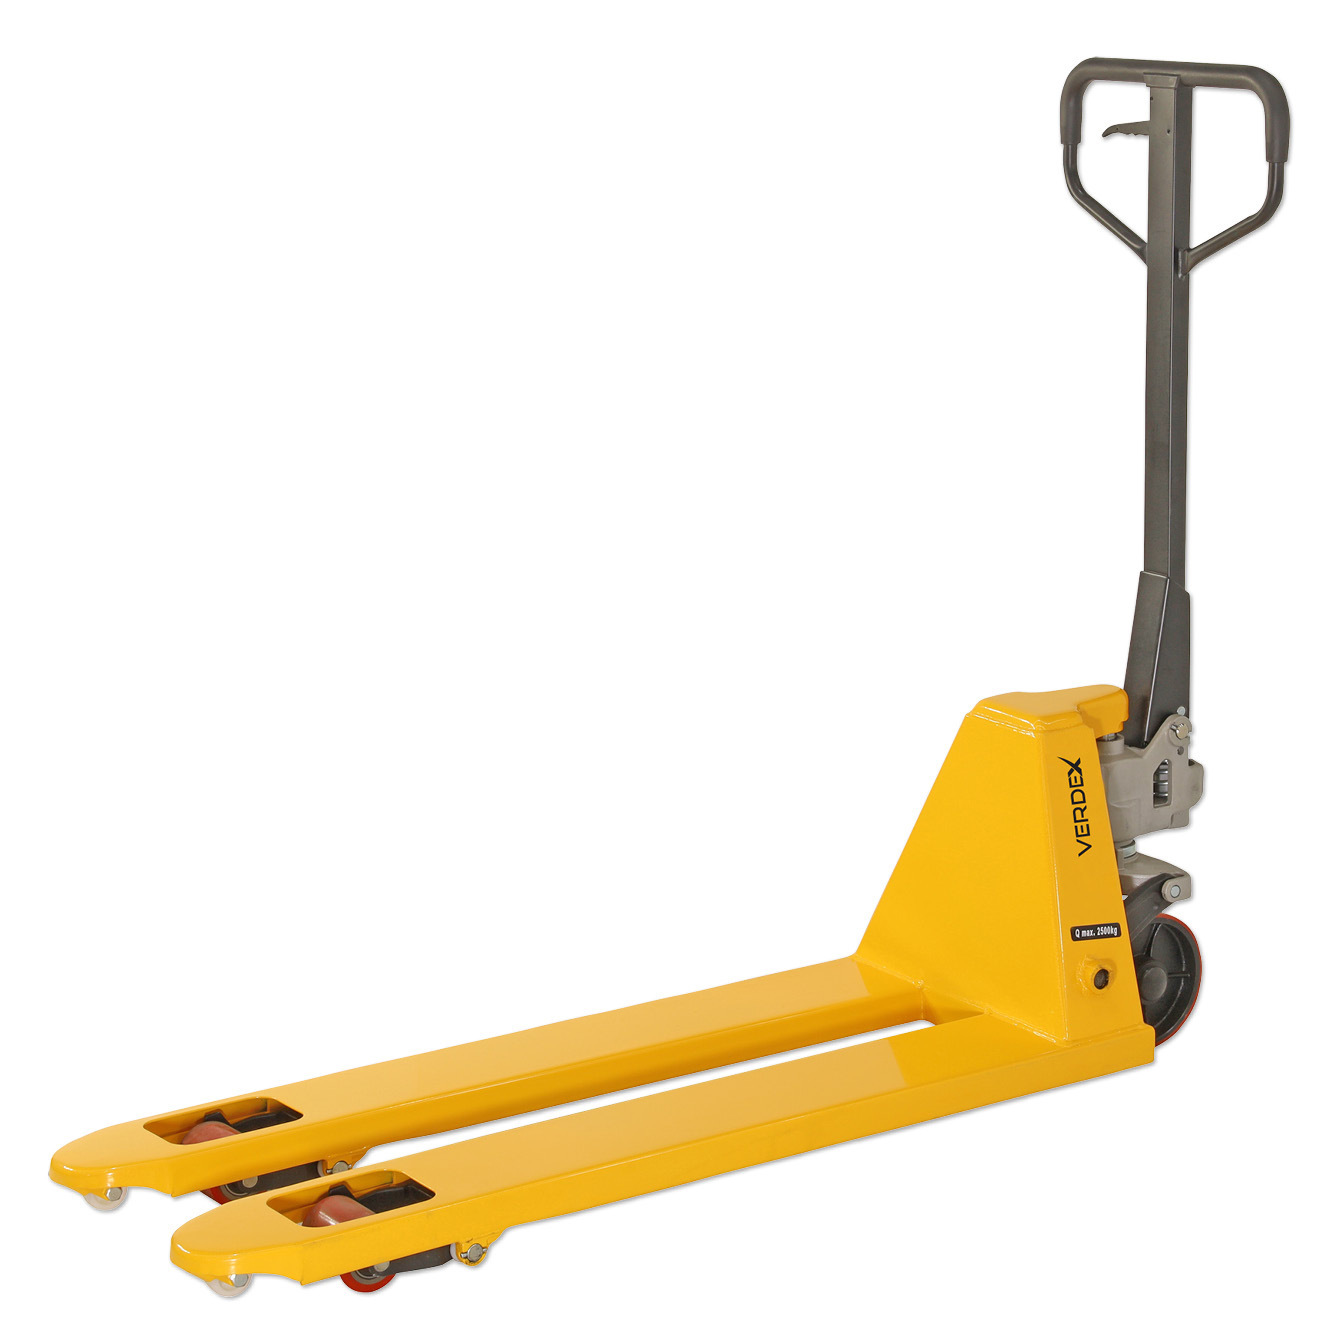  Small Skid Size Pallet Truck - 450mm wide (POLY WHEELS)